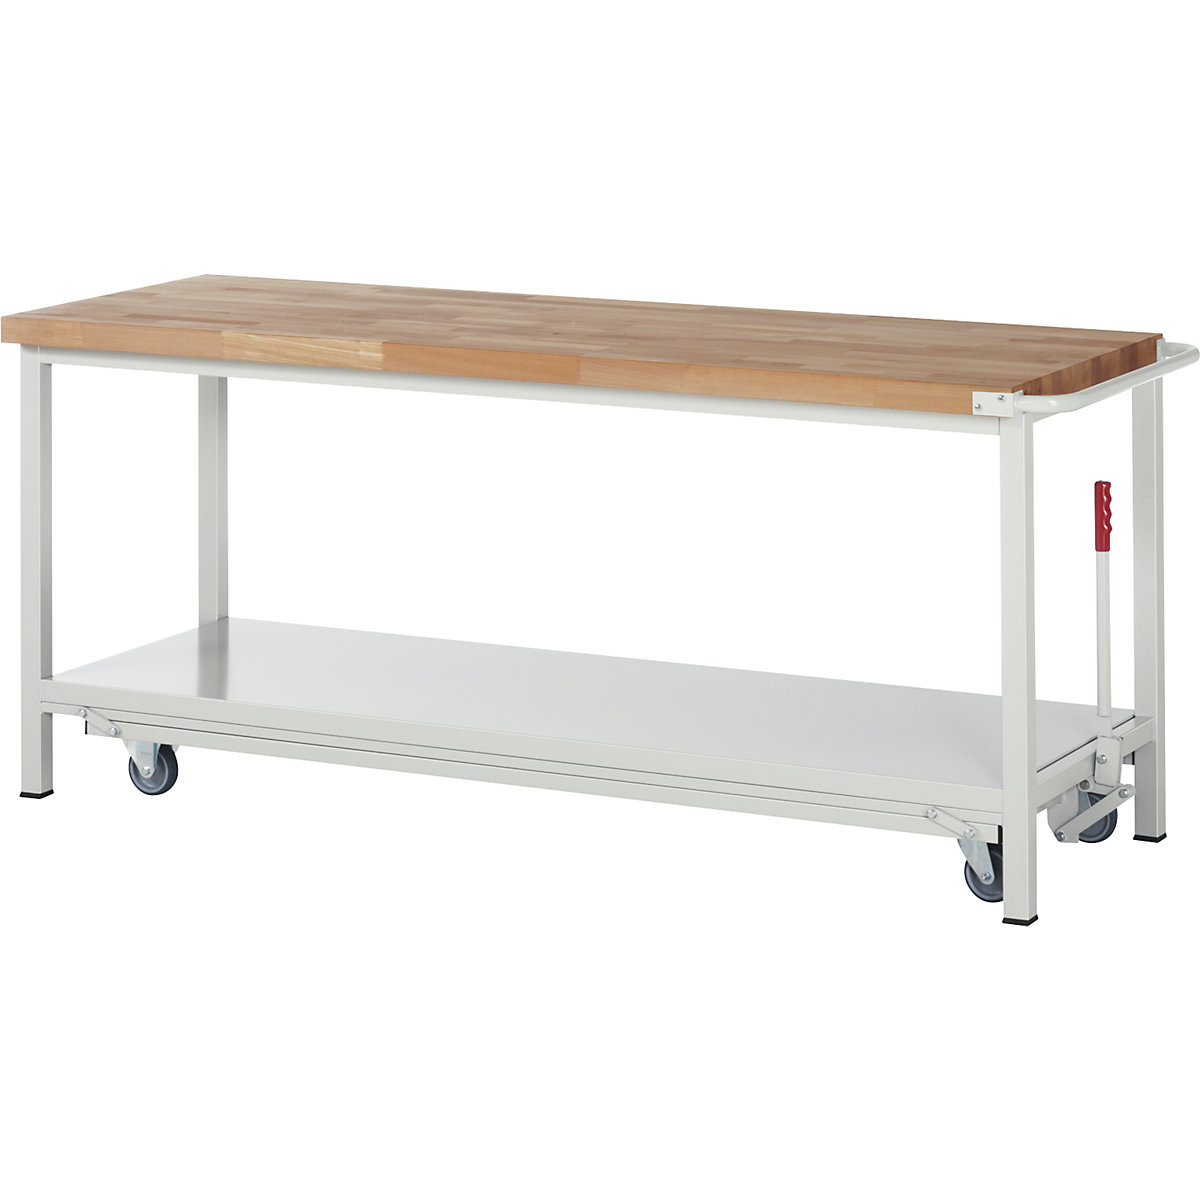 Mobile and lowerable workbench, Series 8 frame construction – eurokraft pro, 1 shelf, WxD 2000 x 700 mm-6